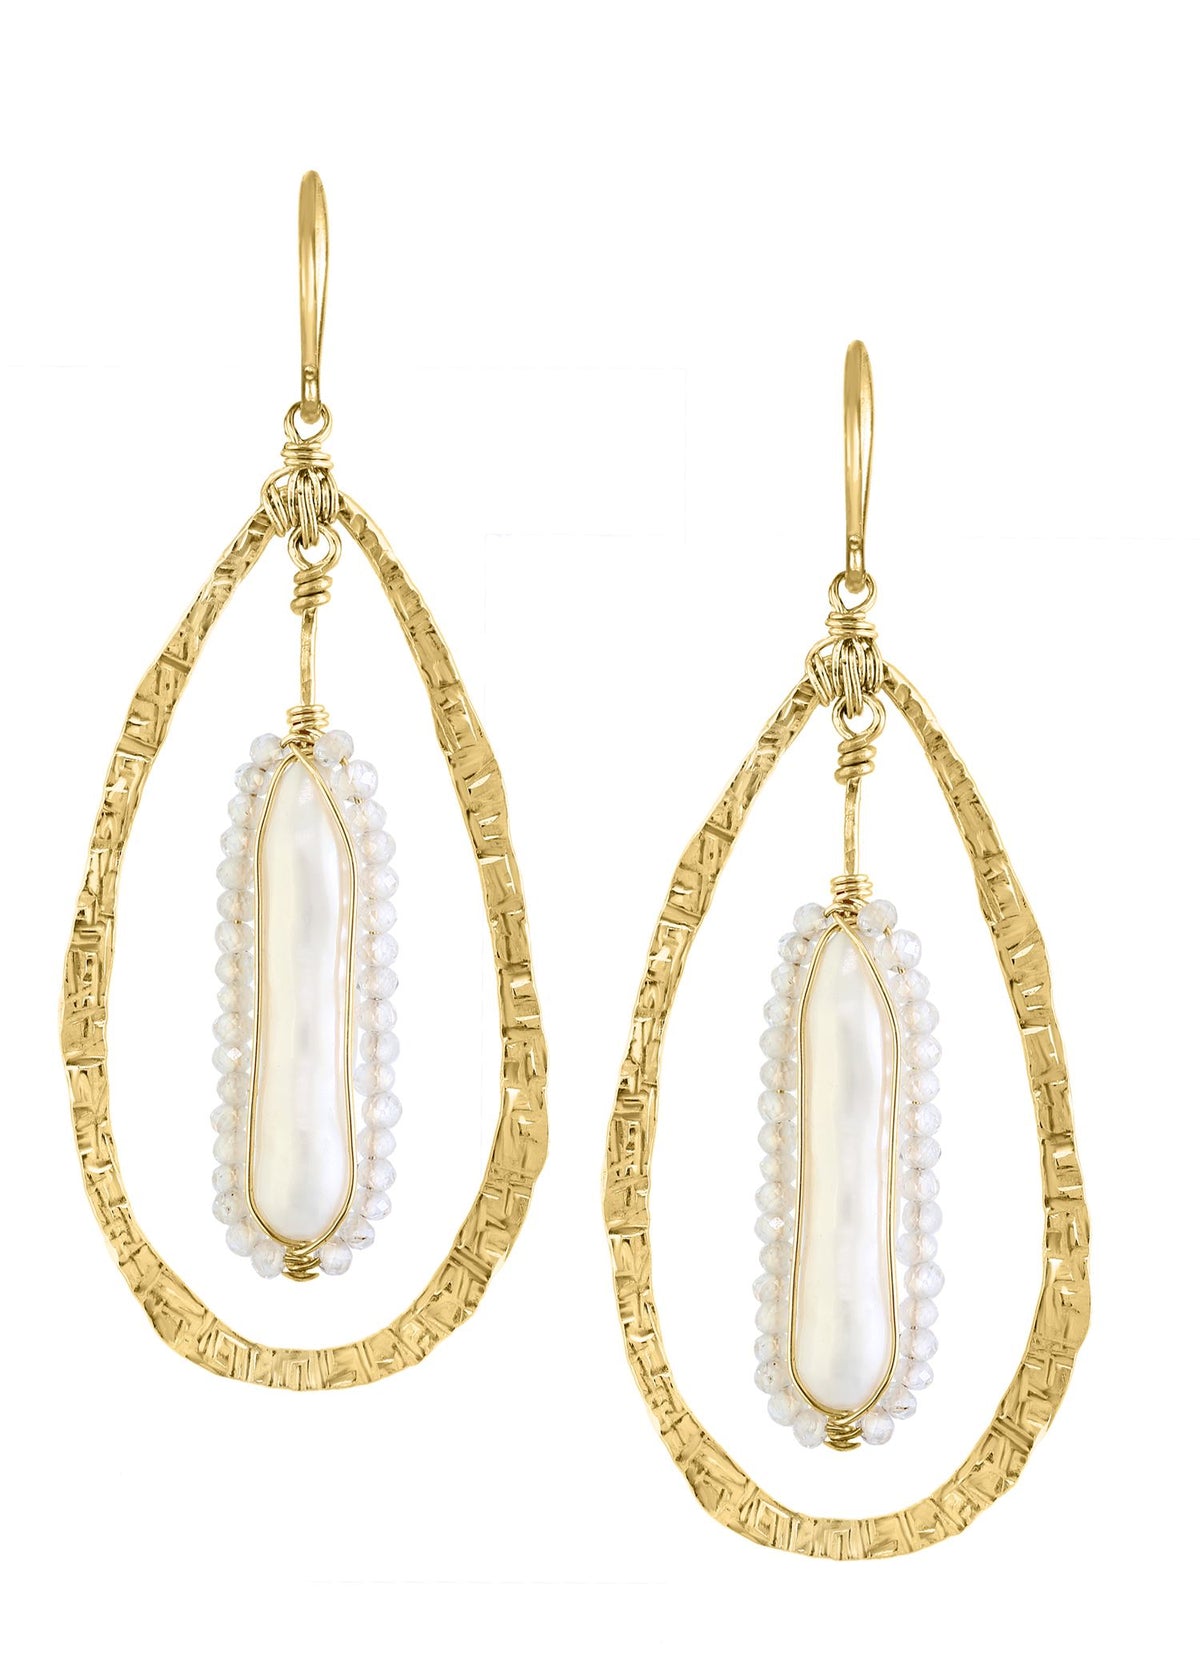 Fresh water pearl White moonstone 14k gold fill Earrings measure 2&quot; in length (including the ear wires) and 11/16&quot; in width Handmade in our Los Angeles studio